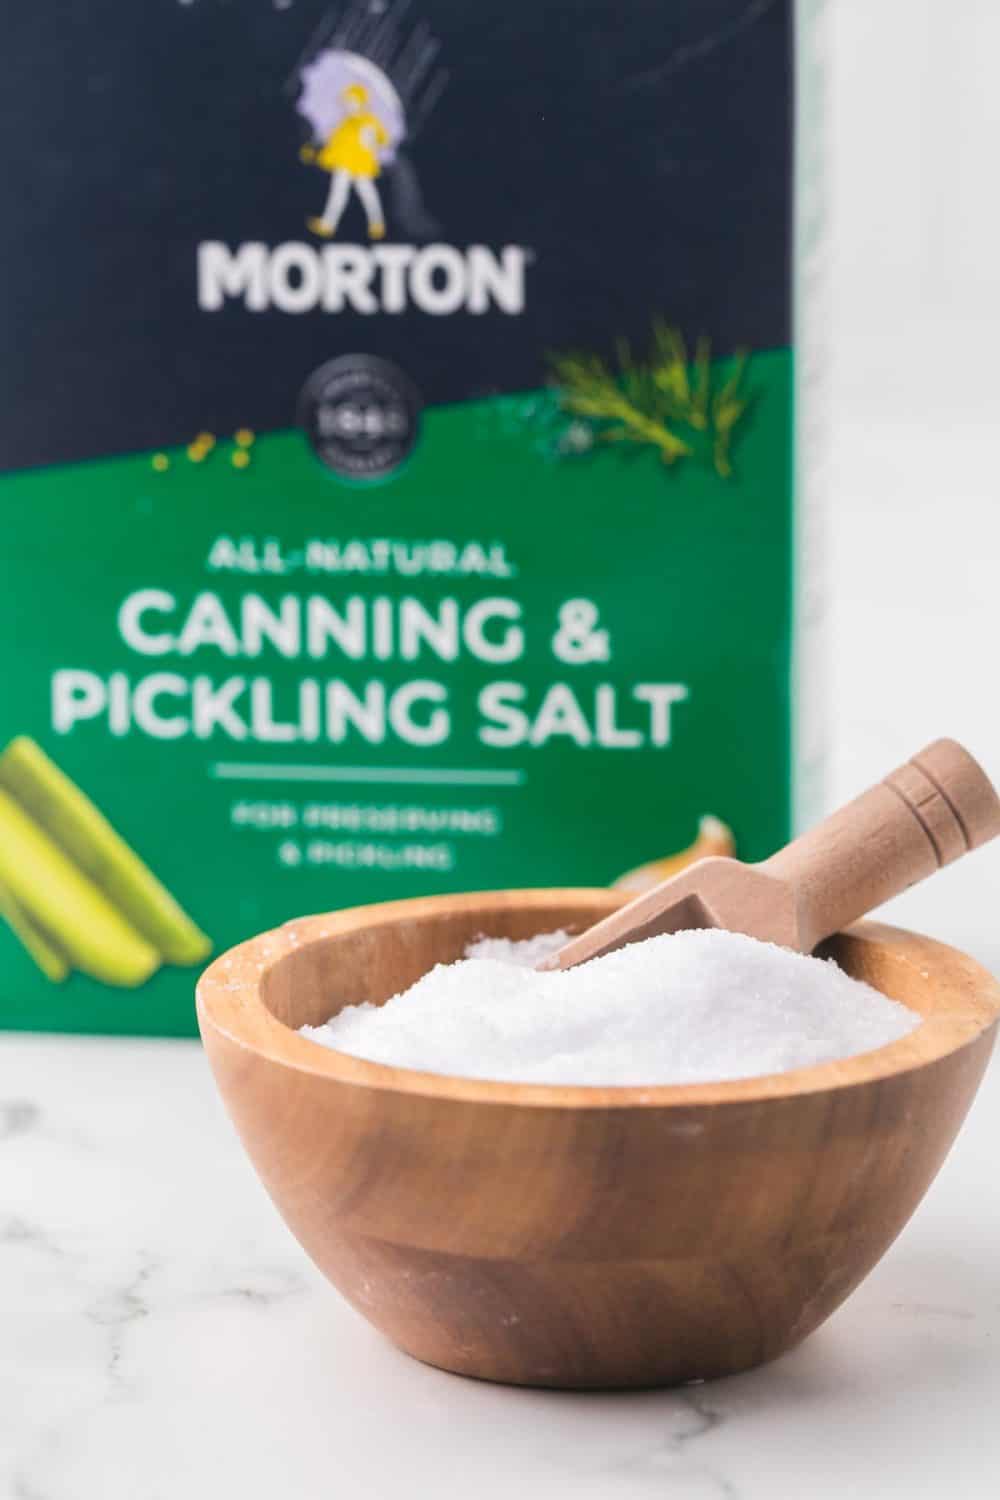 paper box of Morton's all natural canning and pickling salt with a wooden bowl of salt